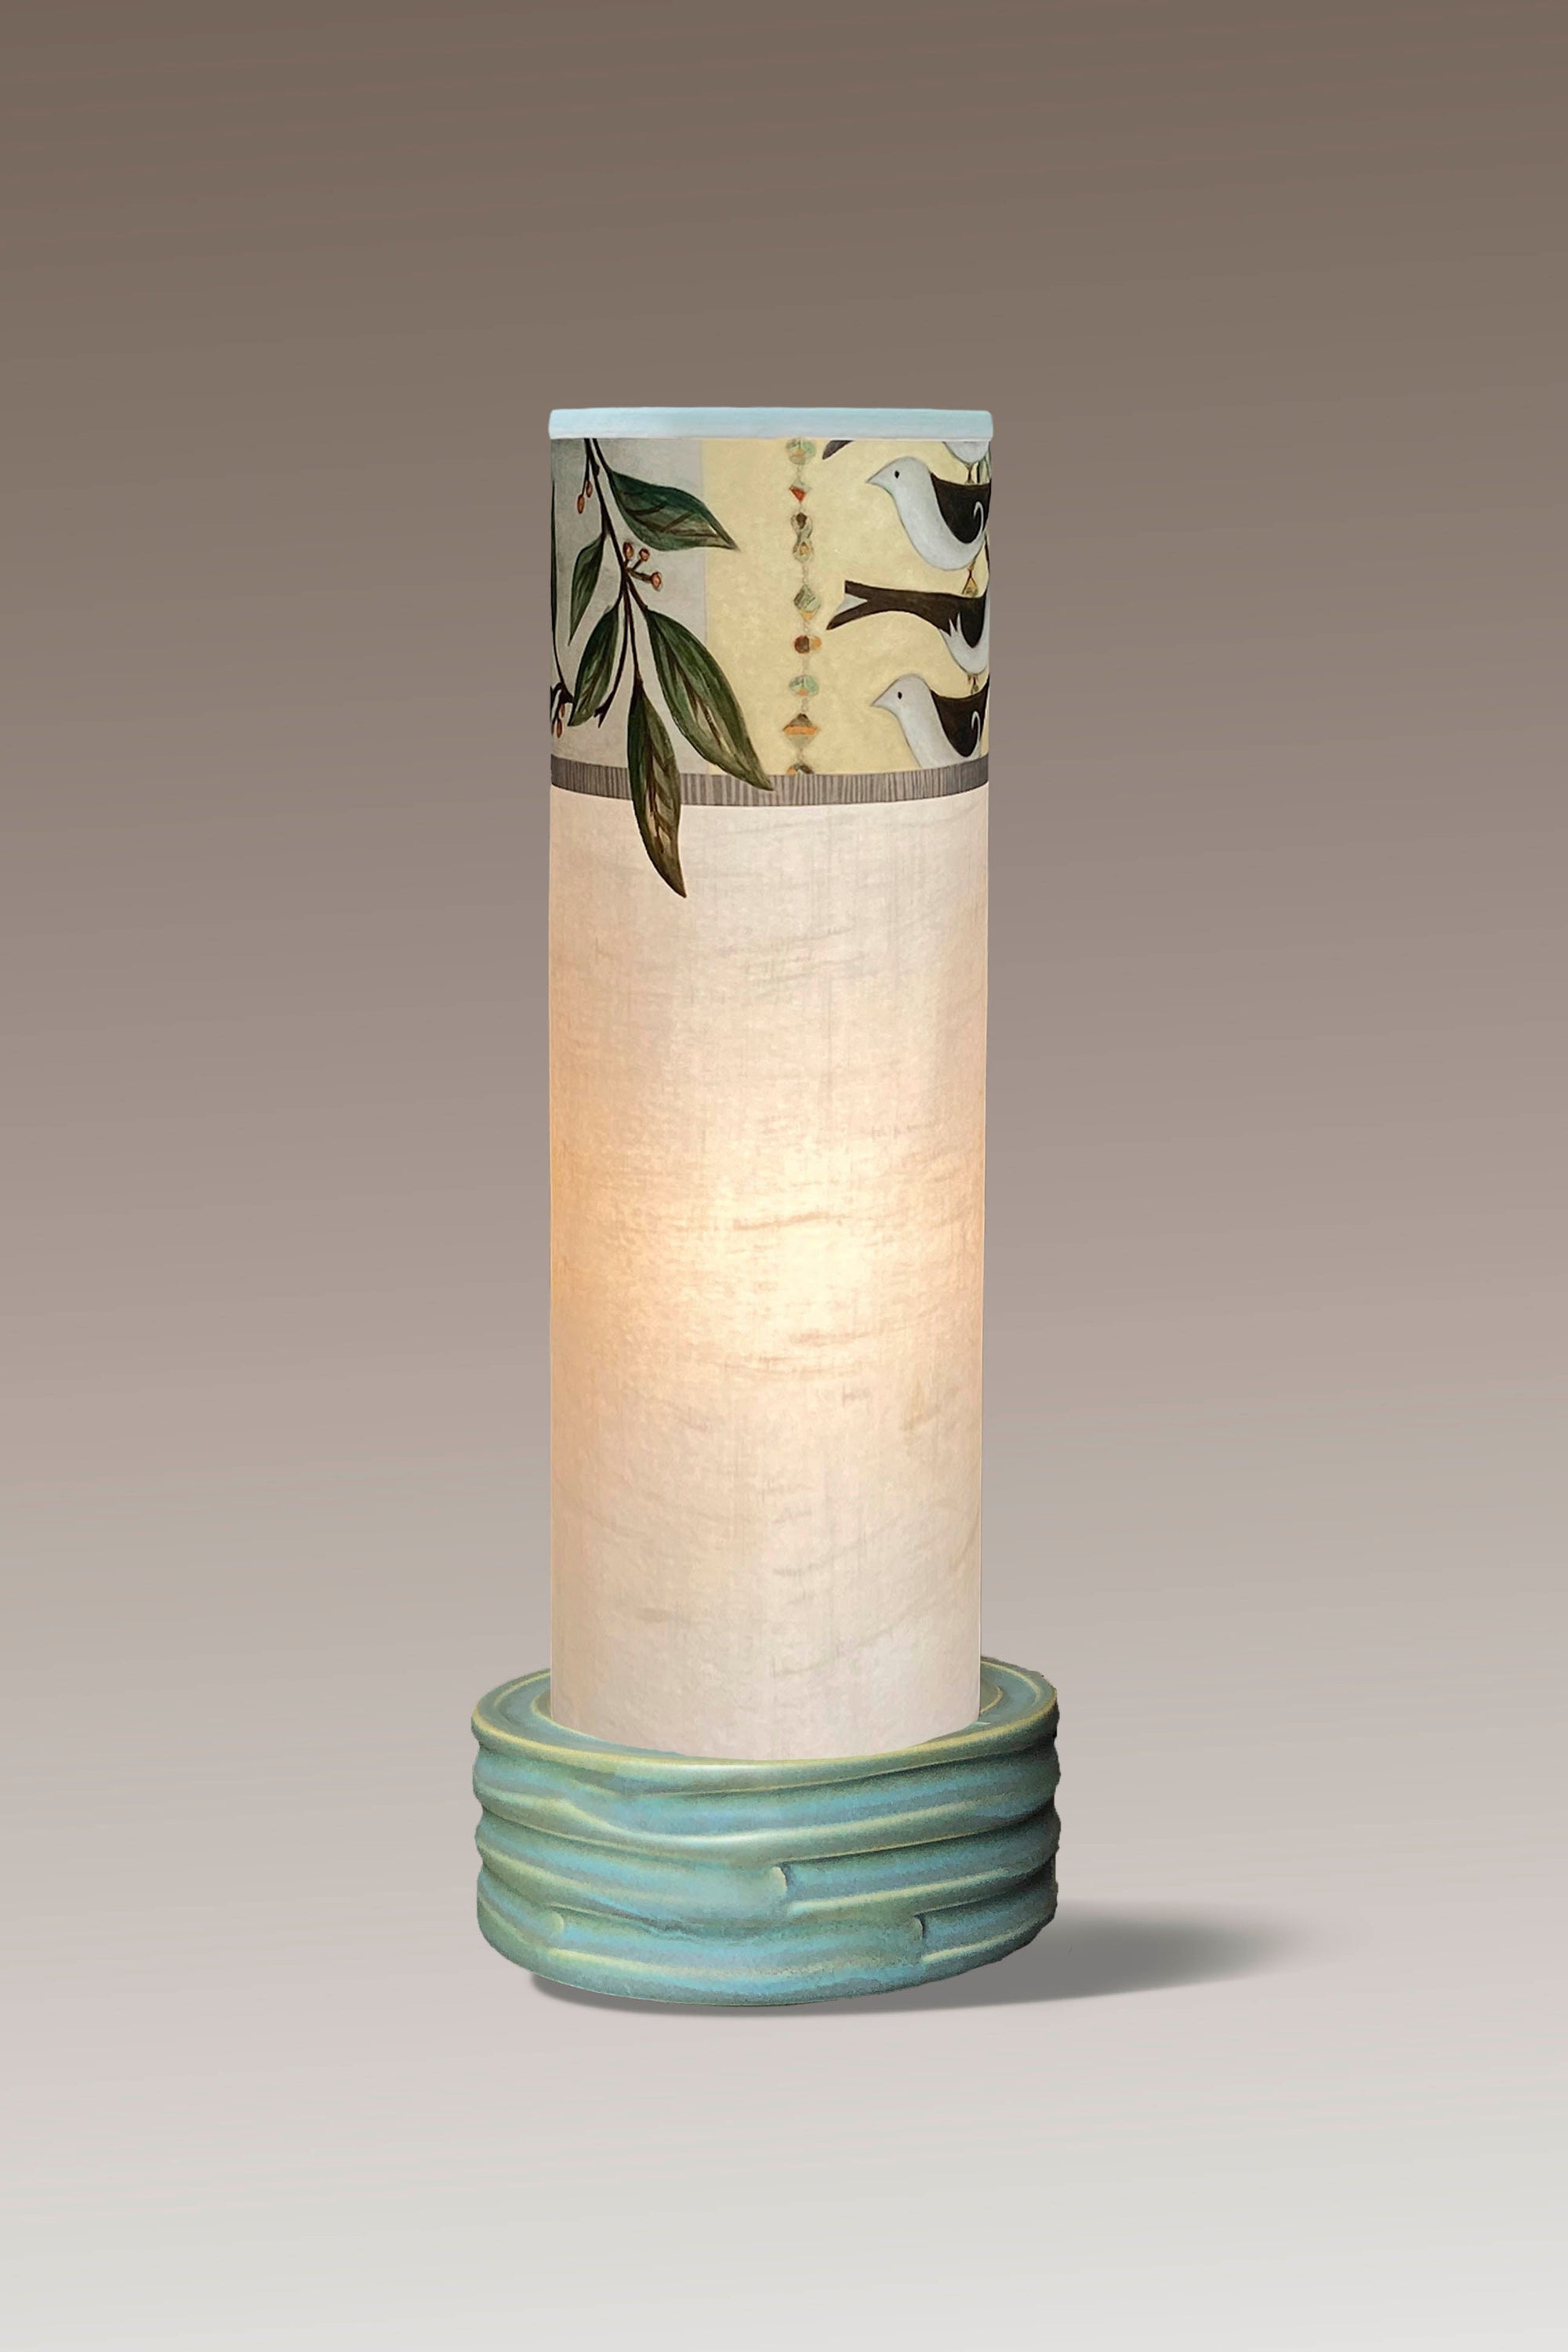 Janna Ugone & Co Table Lamp Ceramic Luminaire Accent Lamp with New Capri Opal Shade